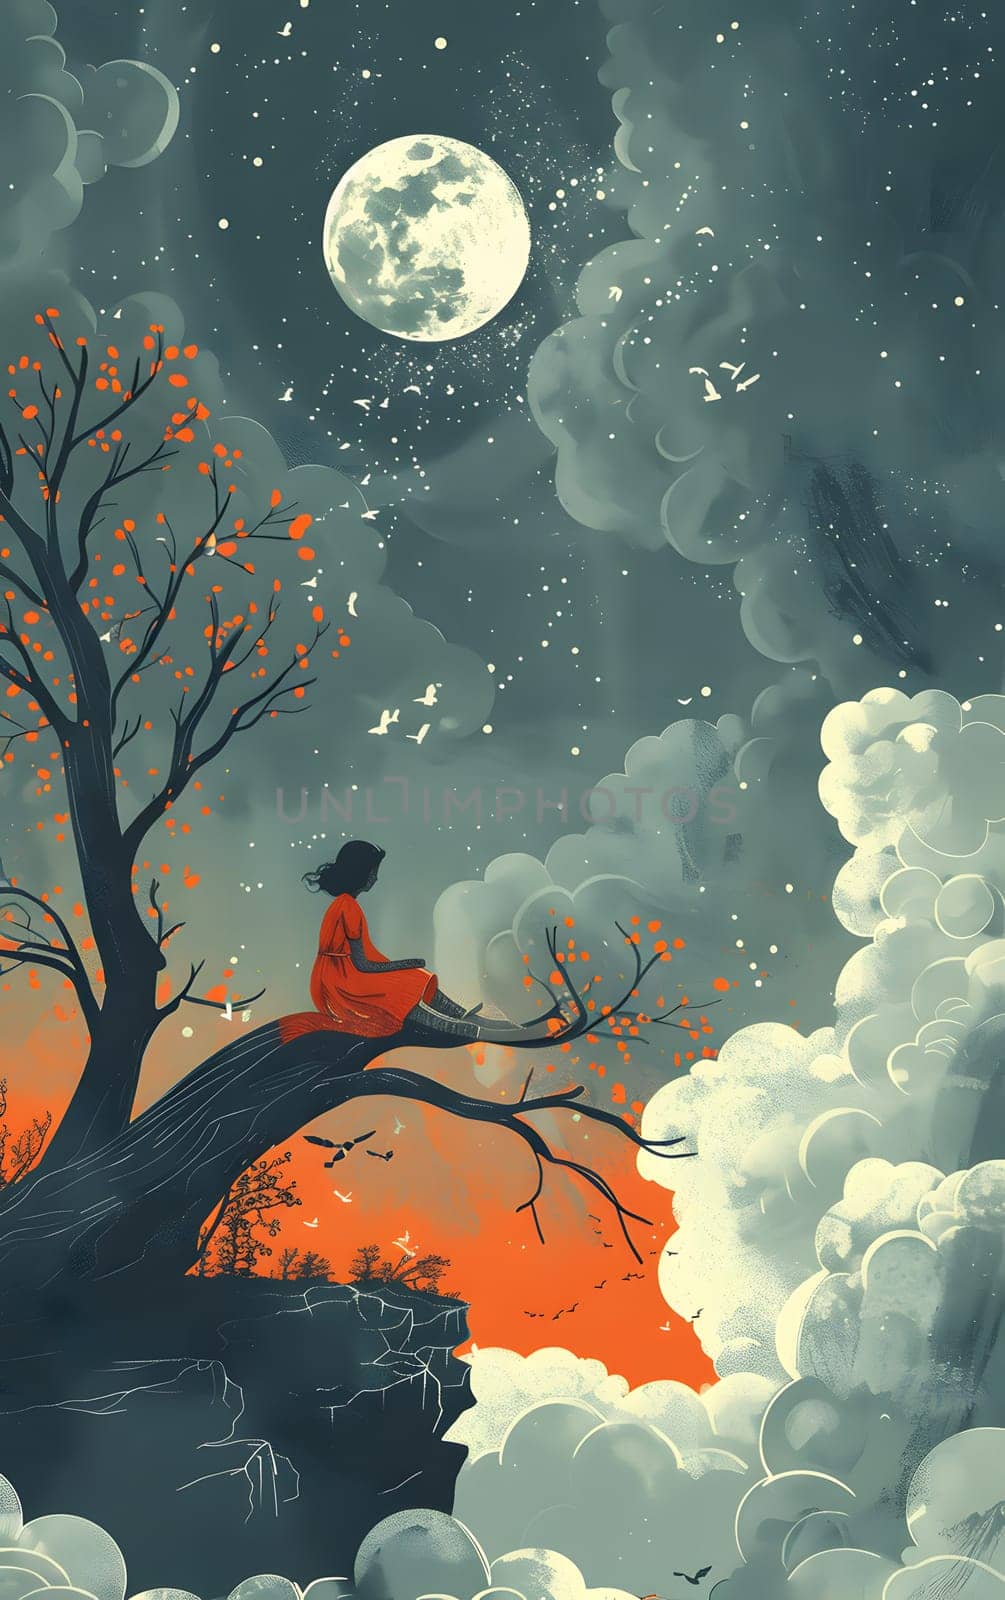 A woman sits on a tree branch, gazing at the moon in the atmospheric night sky by Nadtochiy